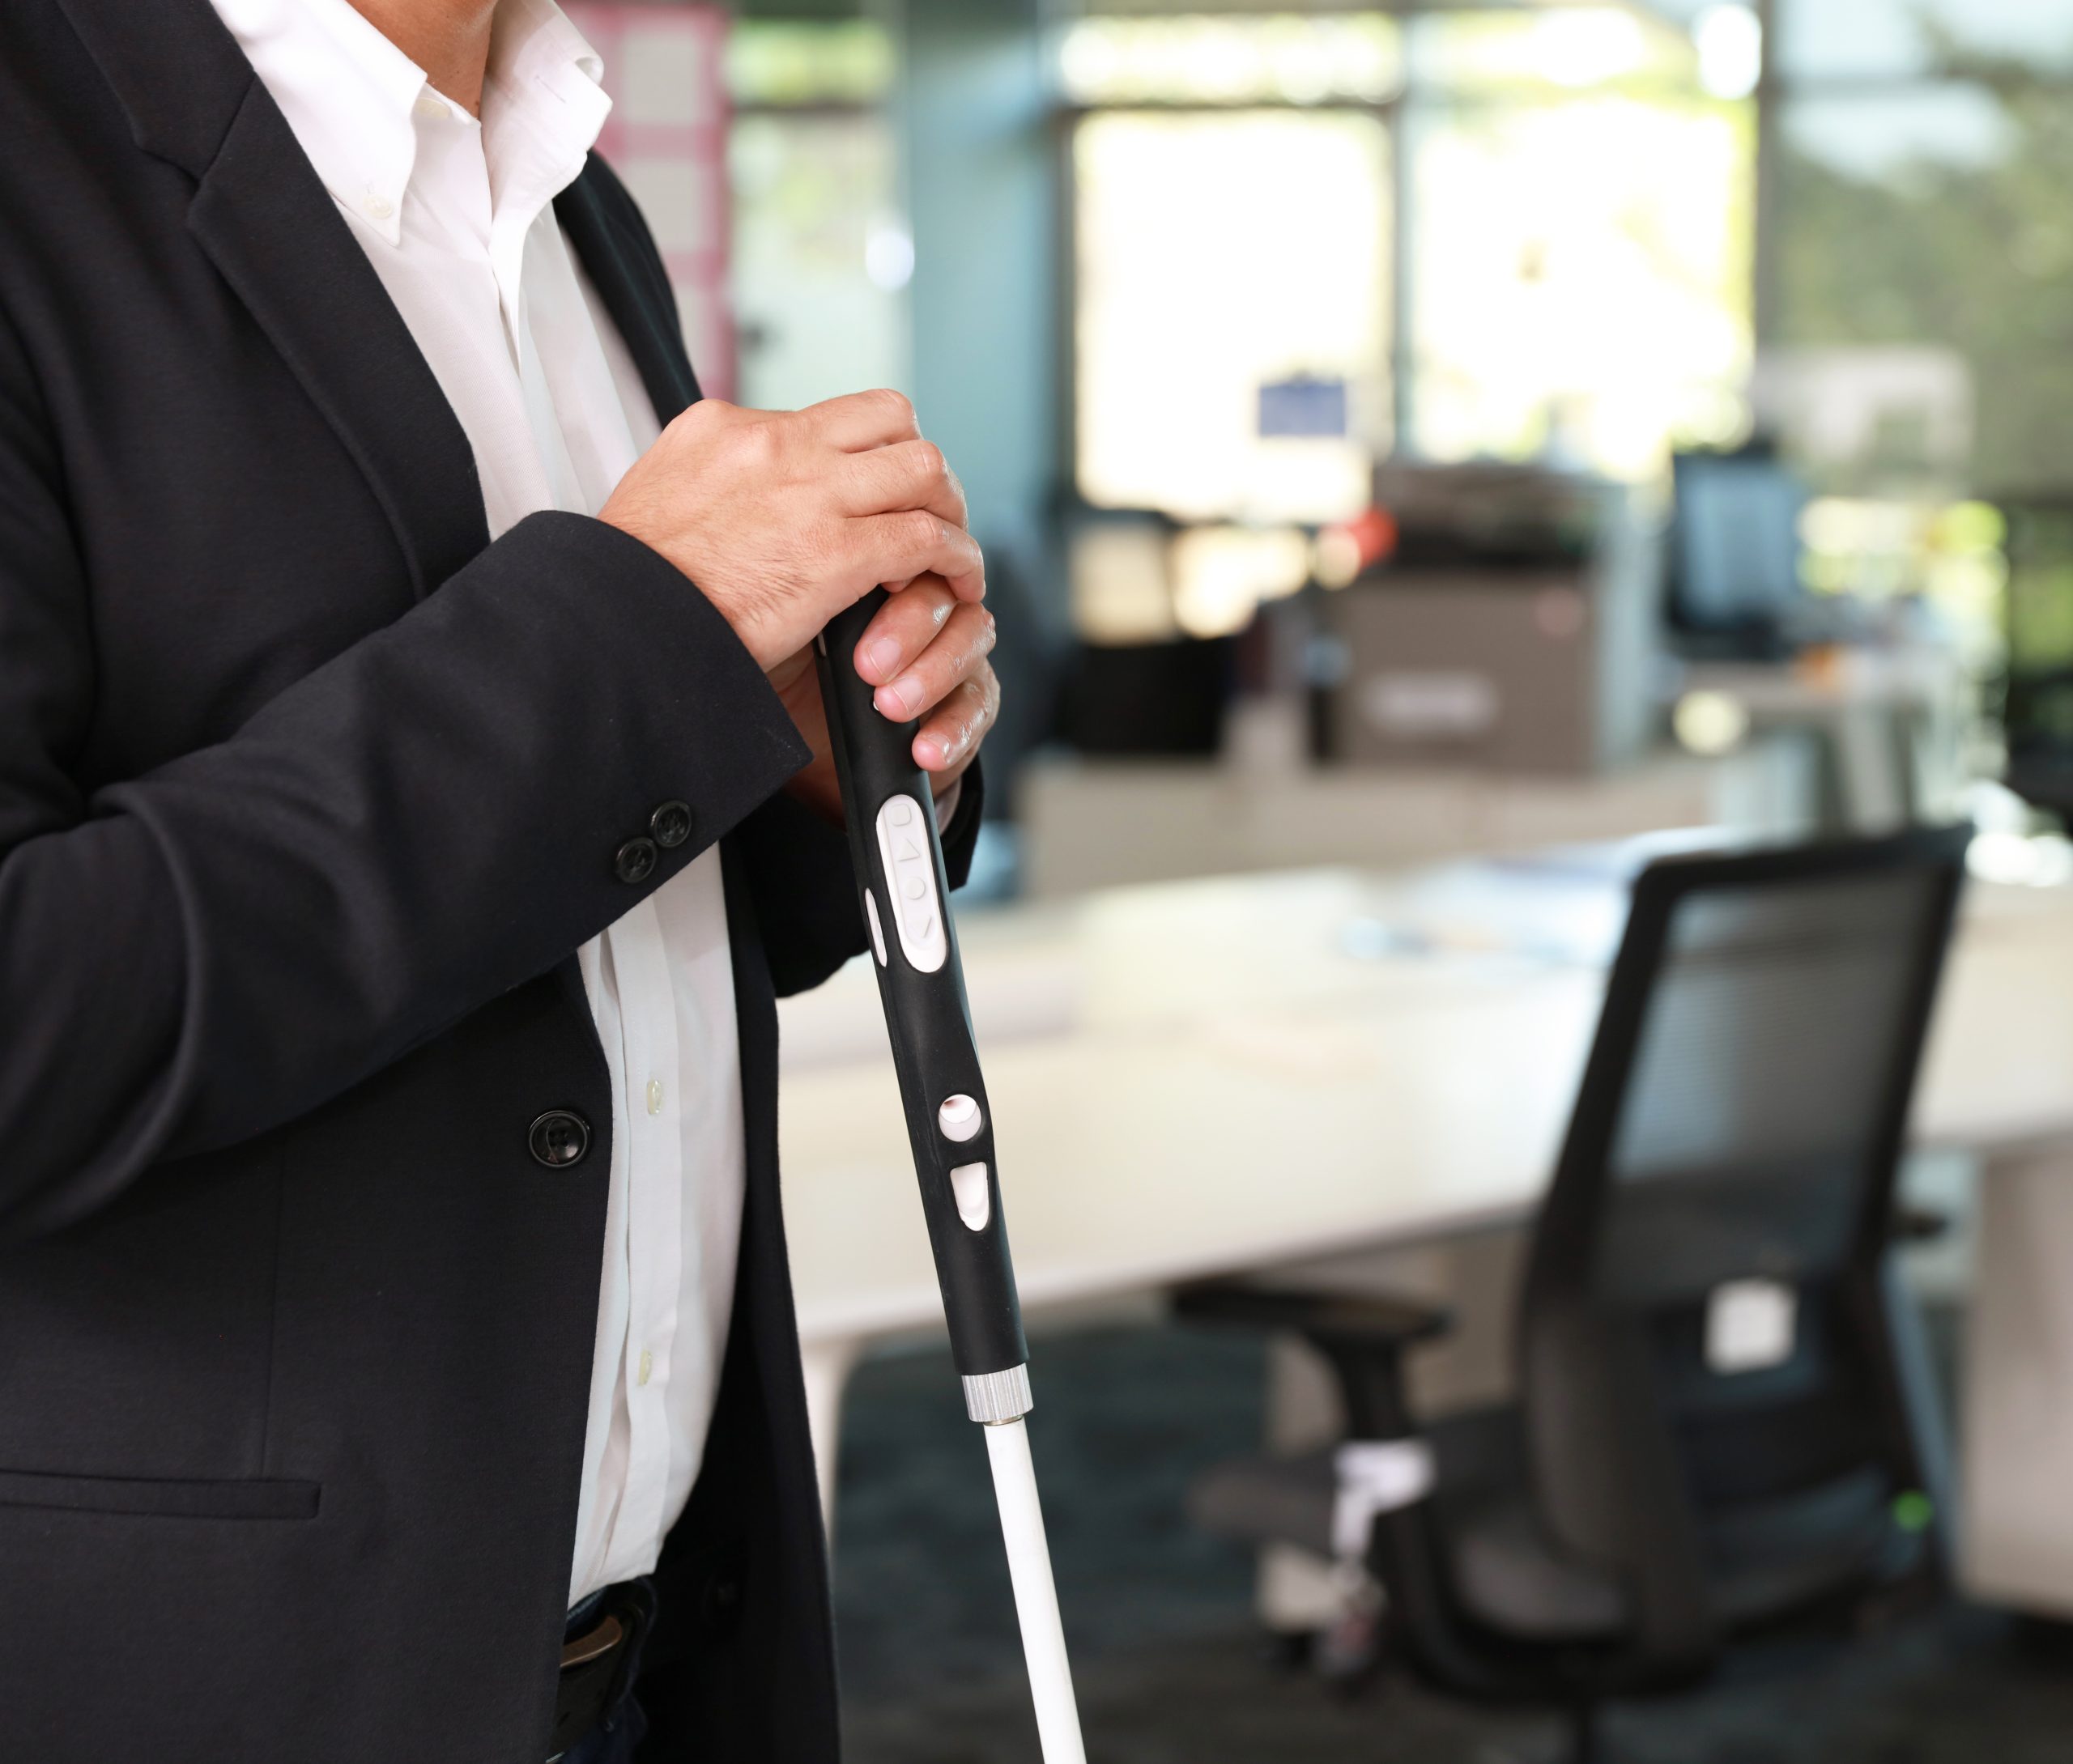 A person who is working holding on to the new smart cane 2 in a workplace